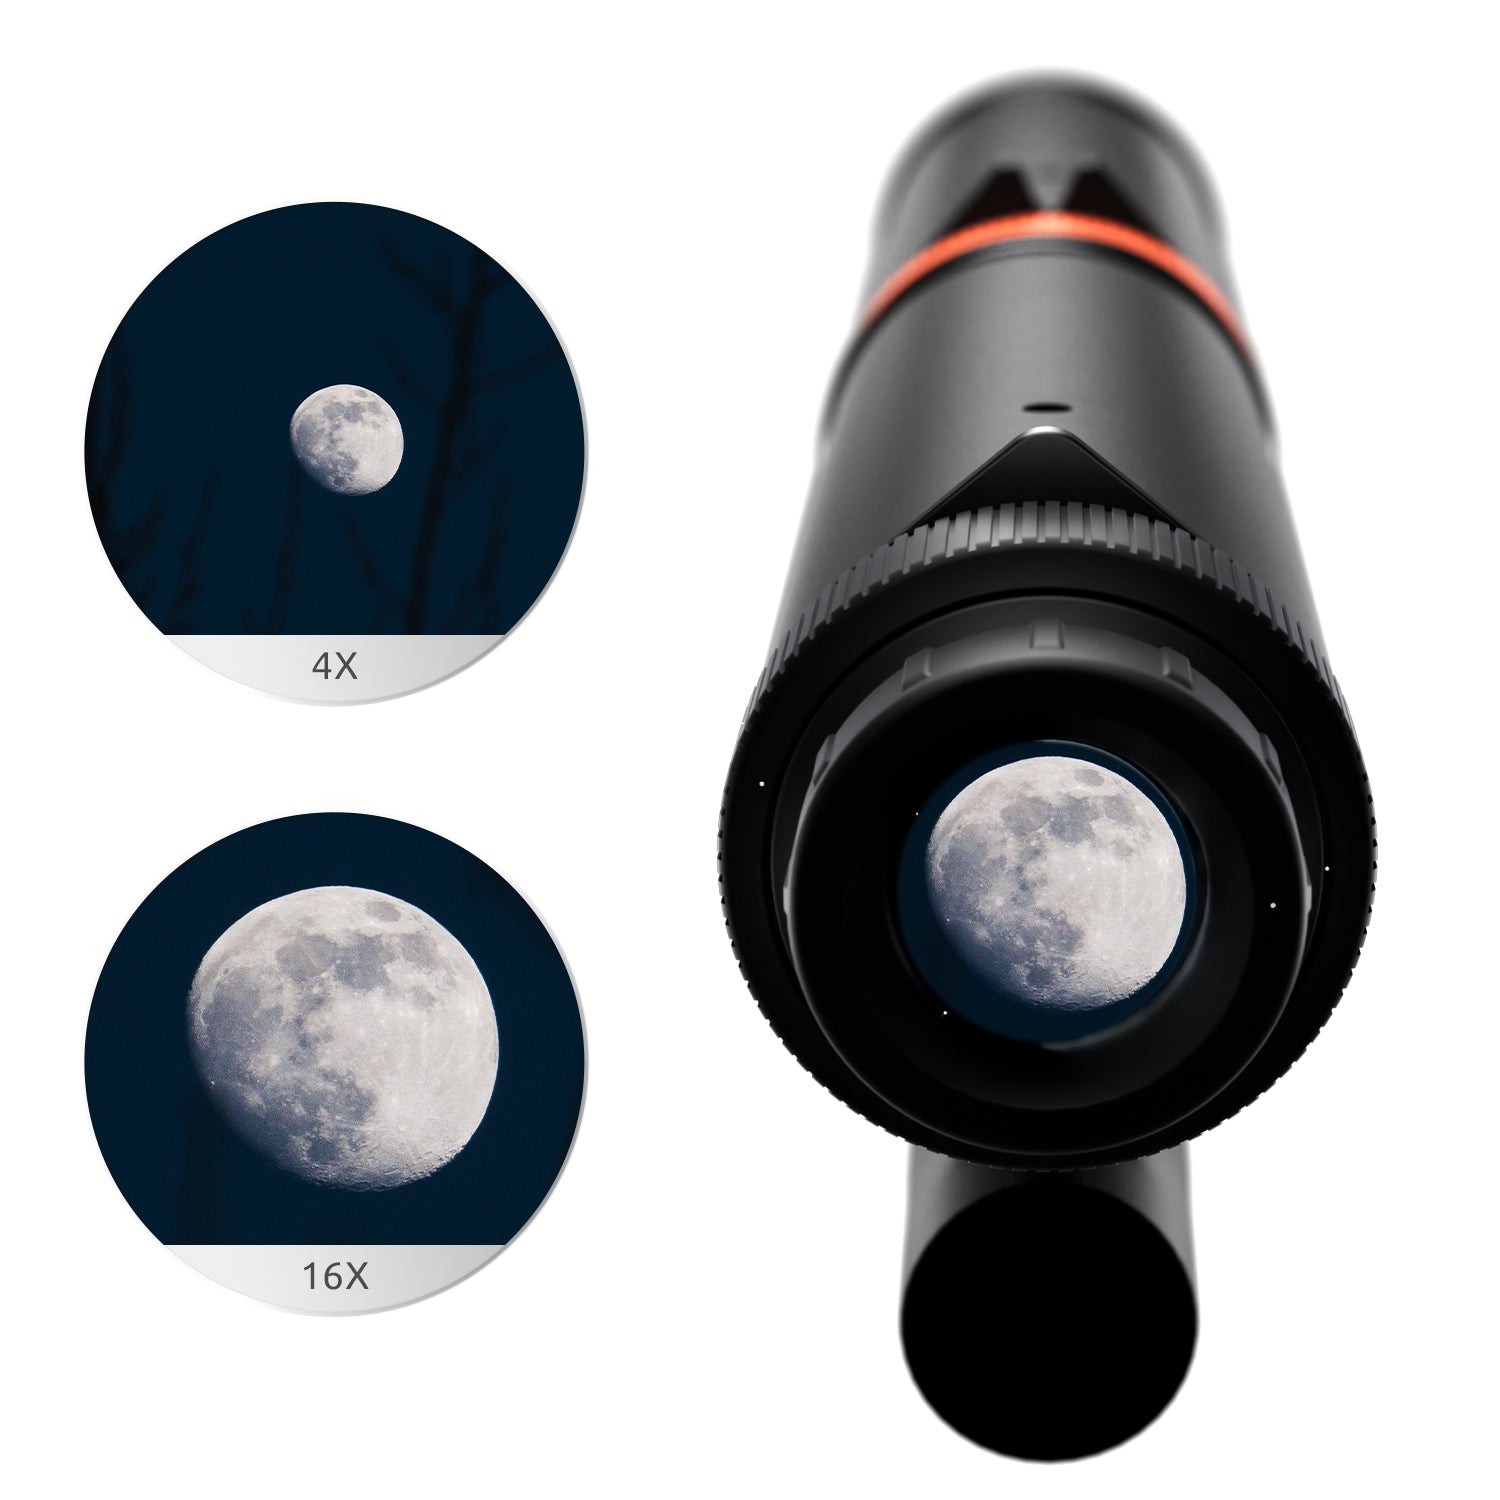  Kids discover small and big, near and far things with the telescope with 16x magnification or the binoculars and monoculars with 4x magnification. 